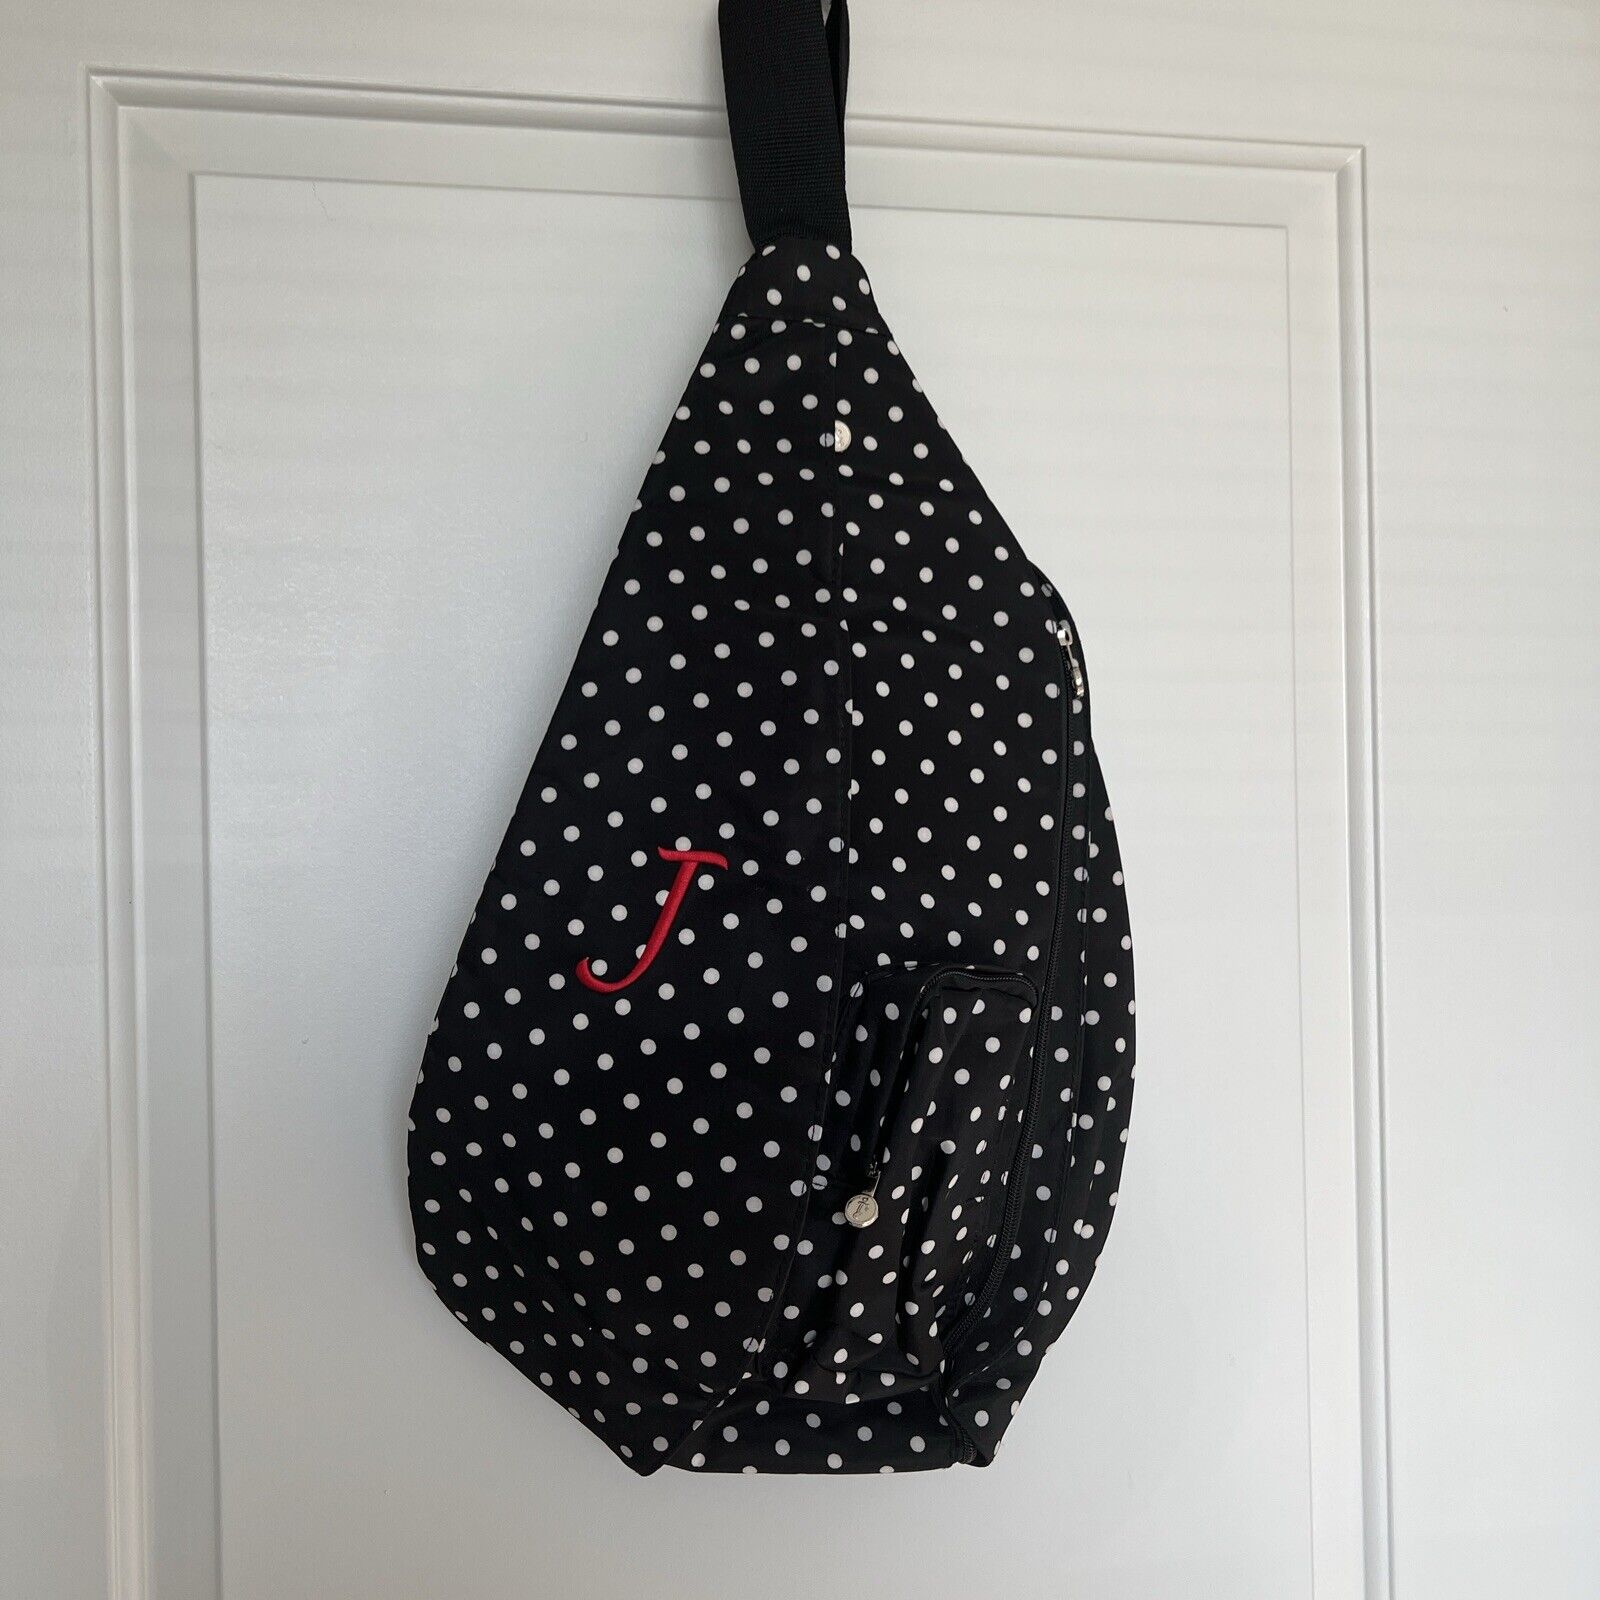 Initials Inc Crossbody Backpack Black With White Polka dots Red “J” Initial.